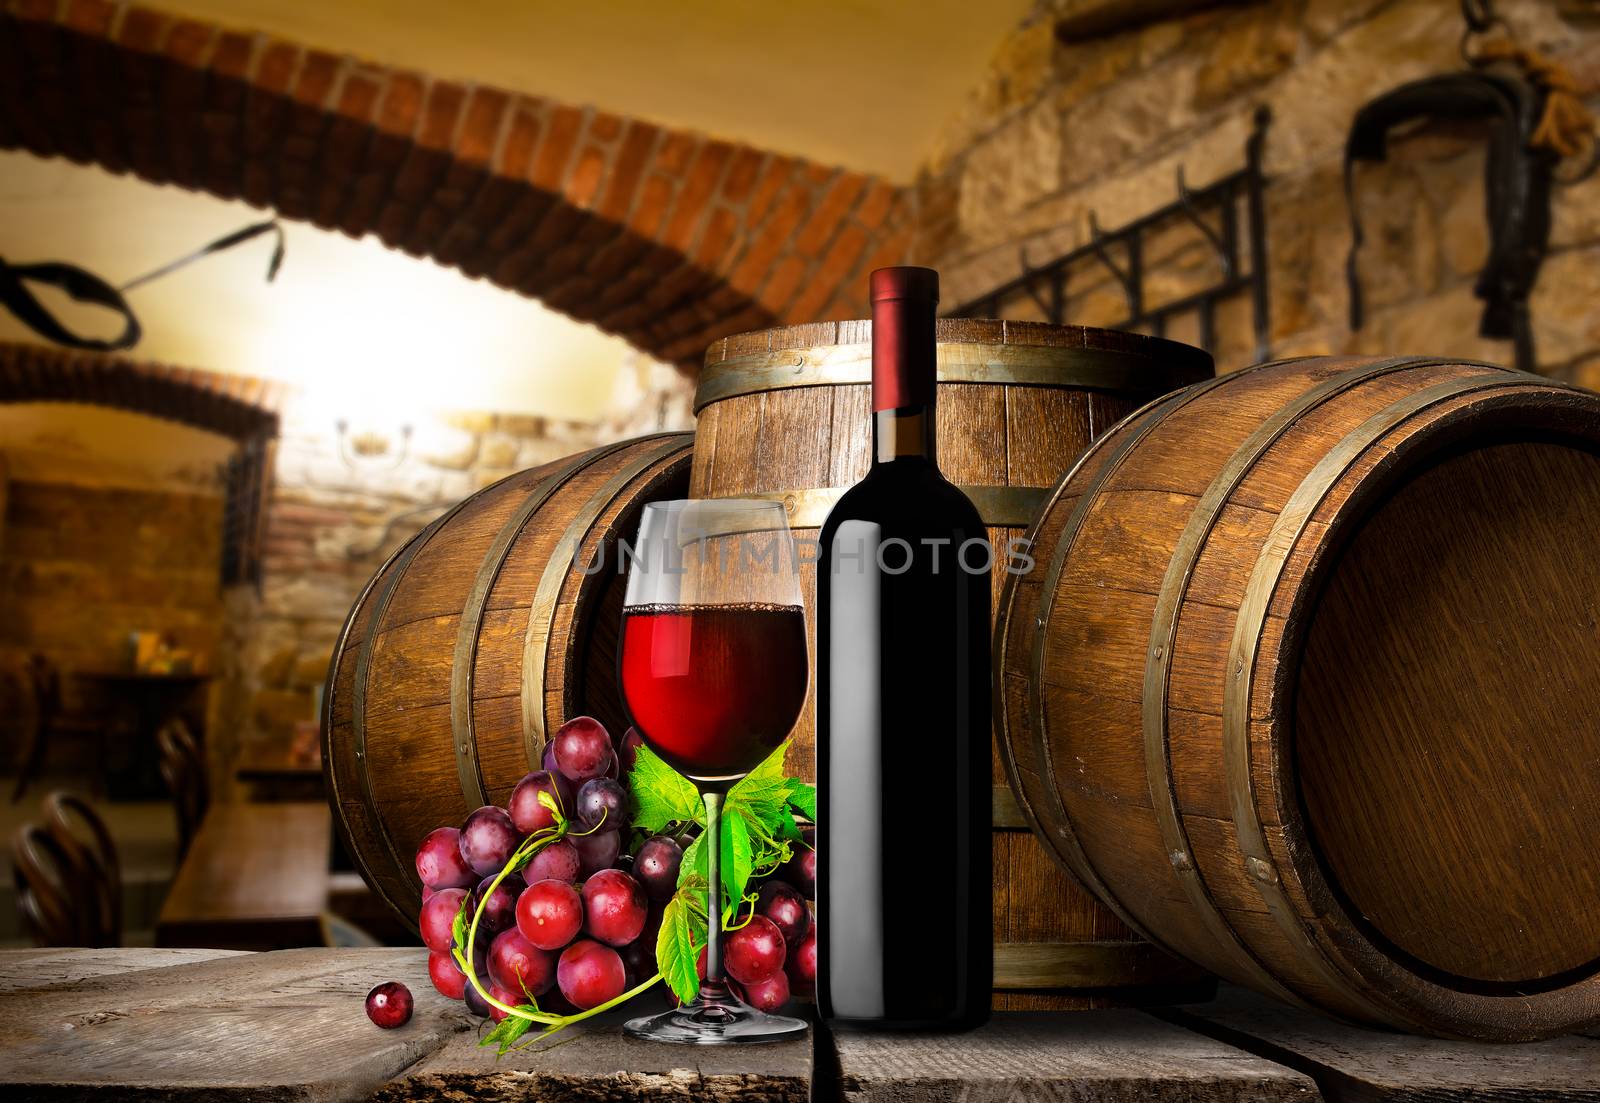 Wine cellar and grapes by Givaga